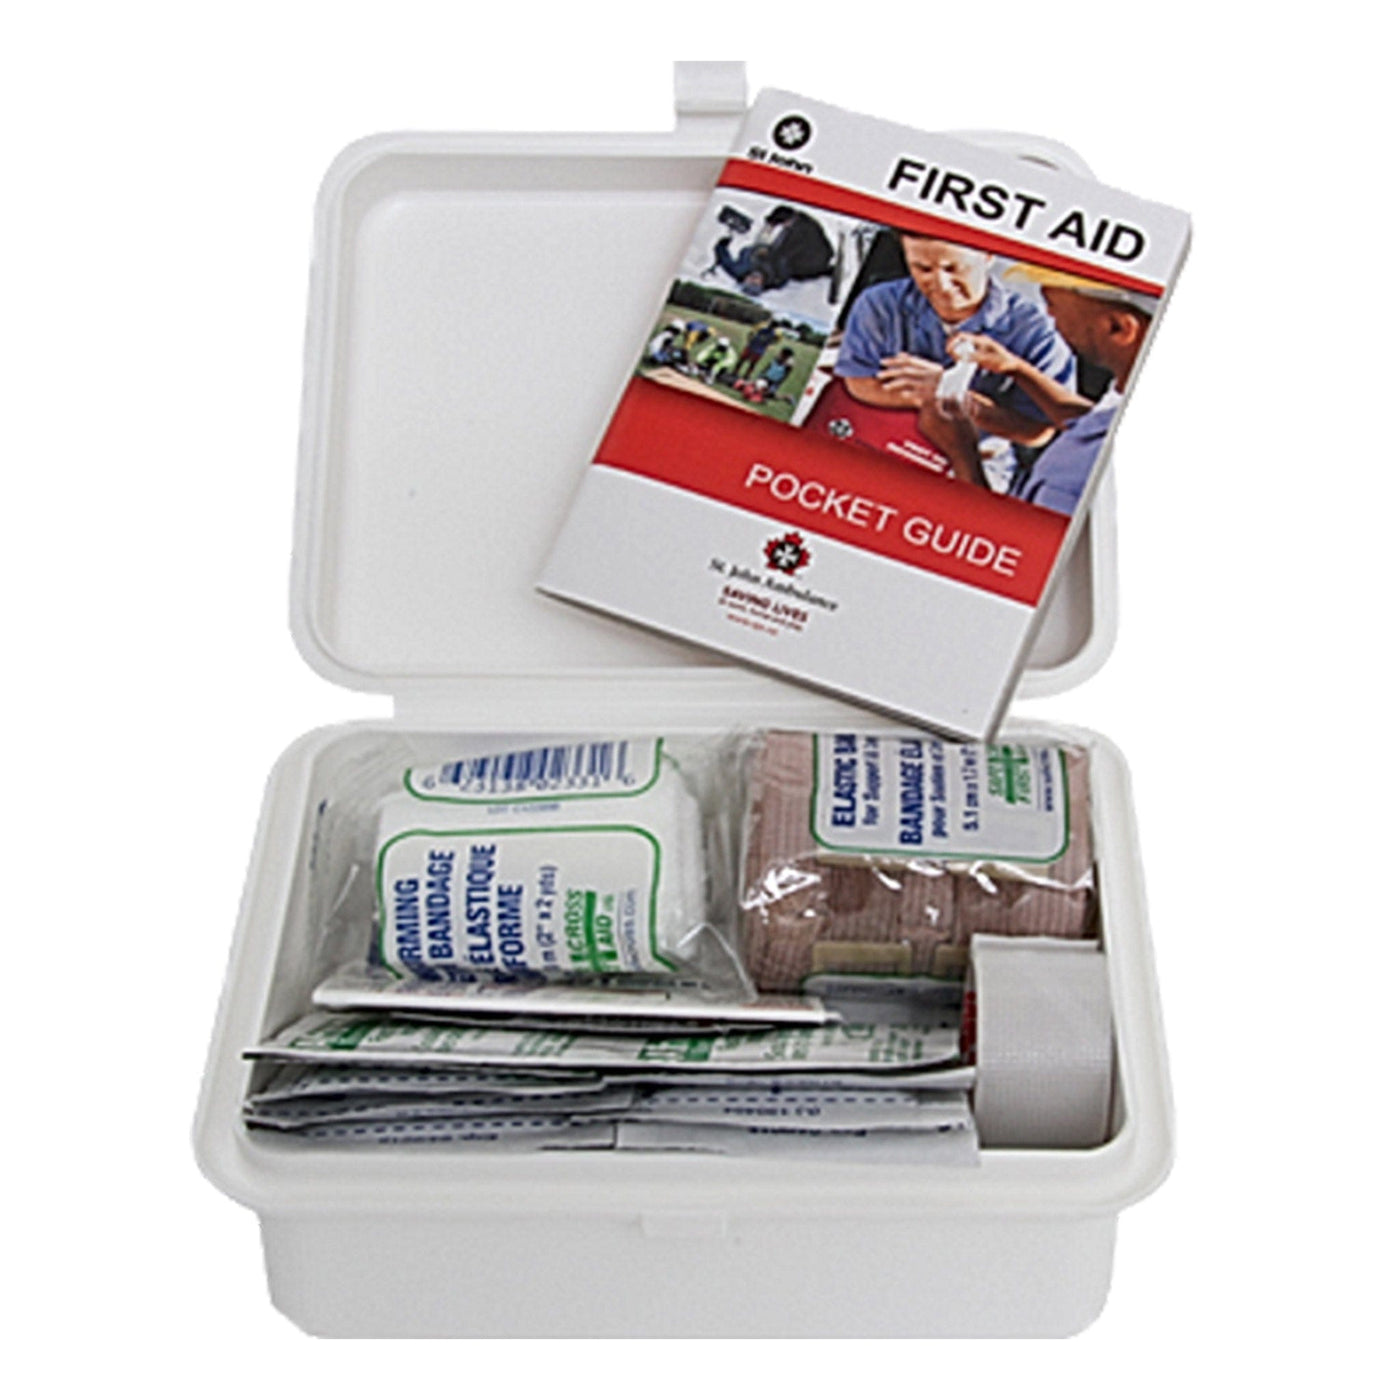 Fox 40 Micro First Aid Kit - The Hockey Shop Source For Sports